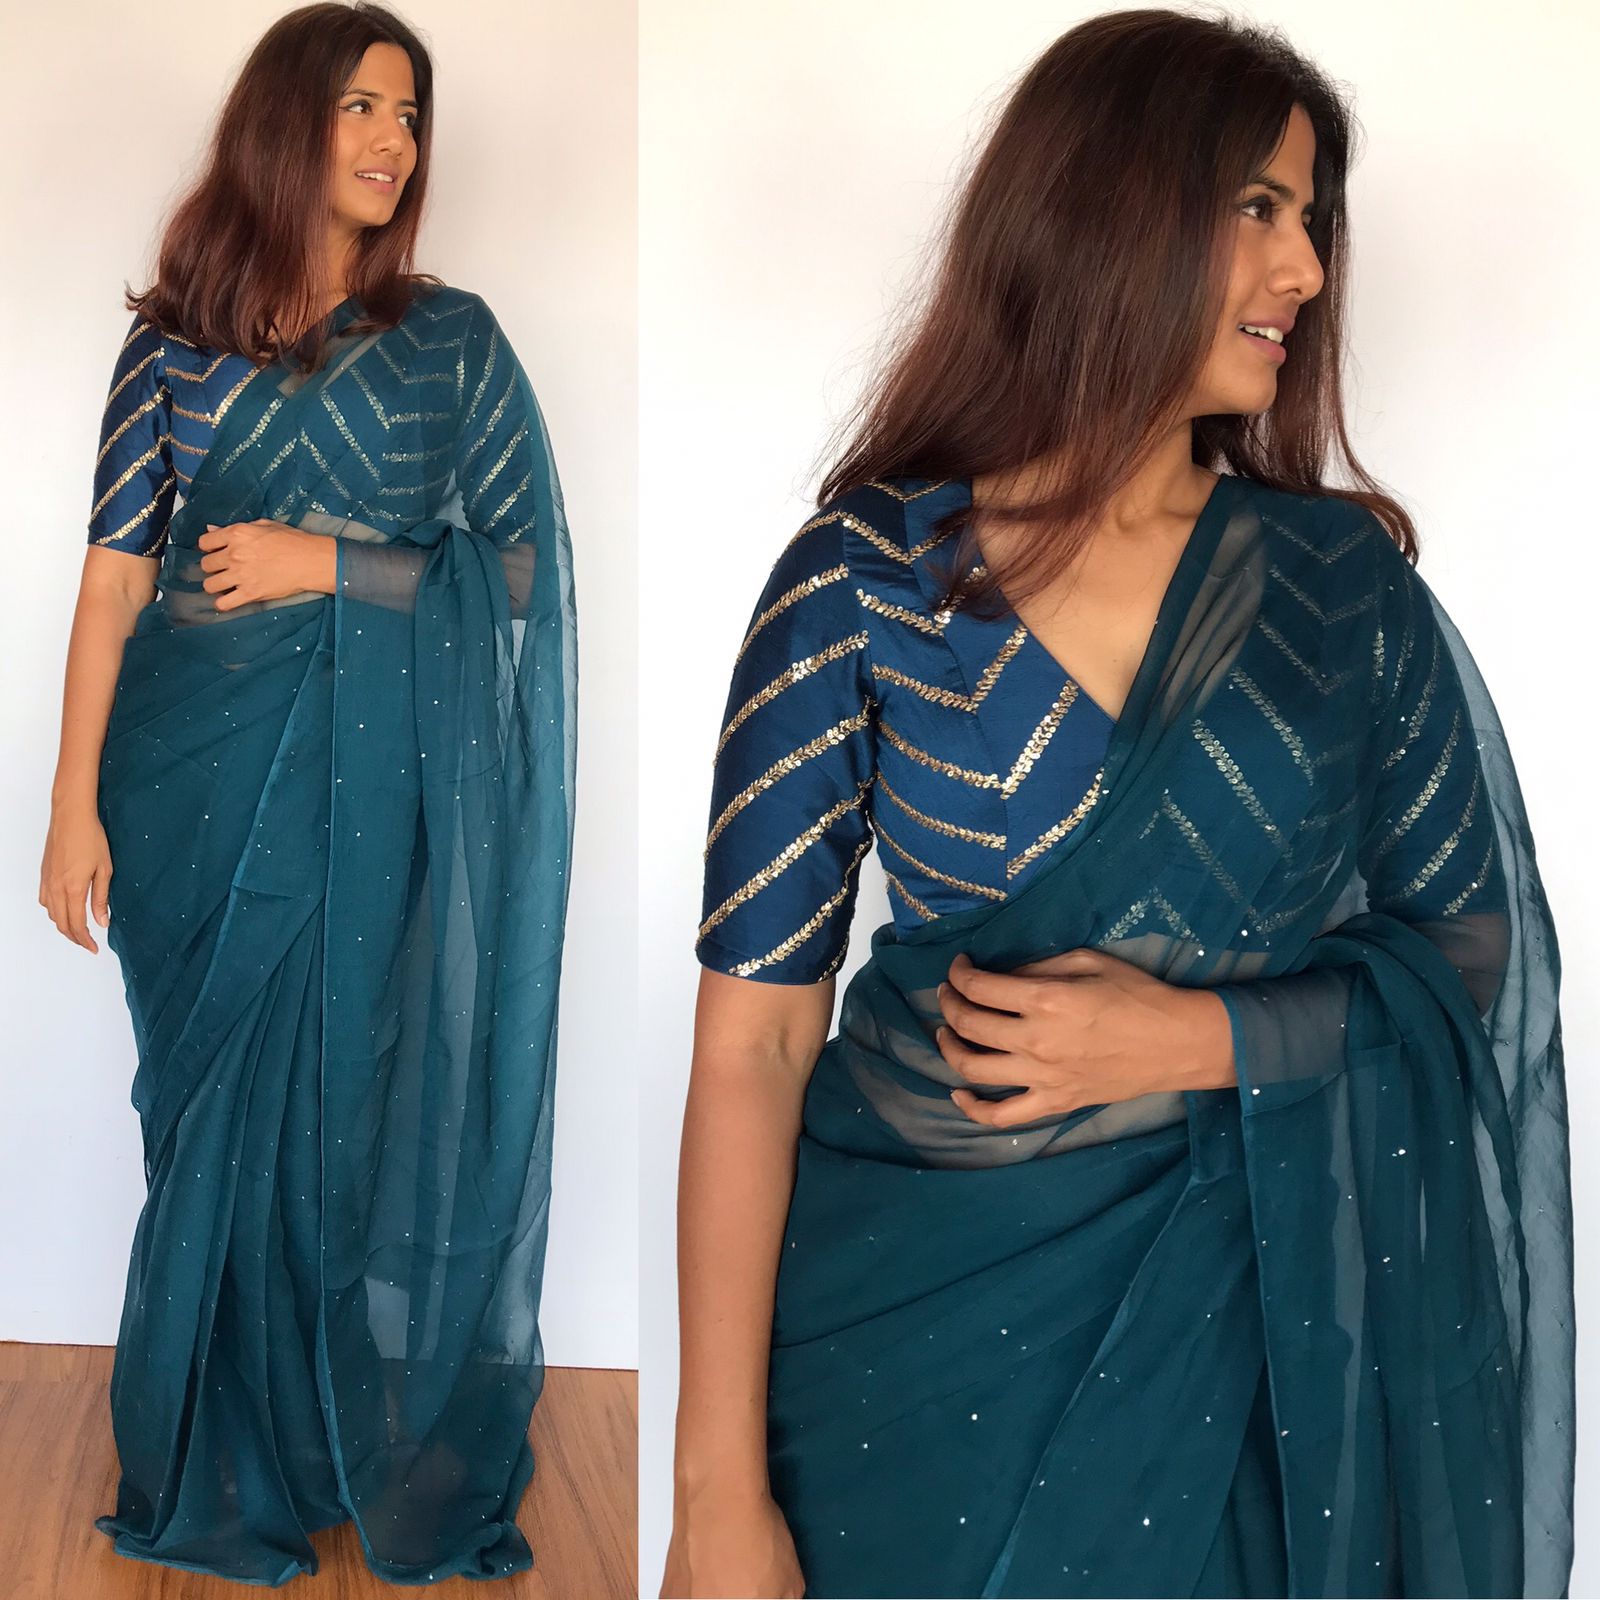 6 Kinds of Saree Wearing Styles to Look Slim N' Stunning